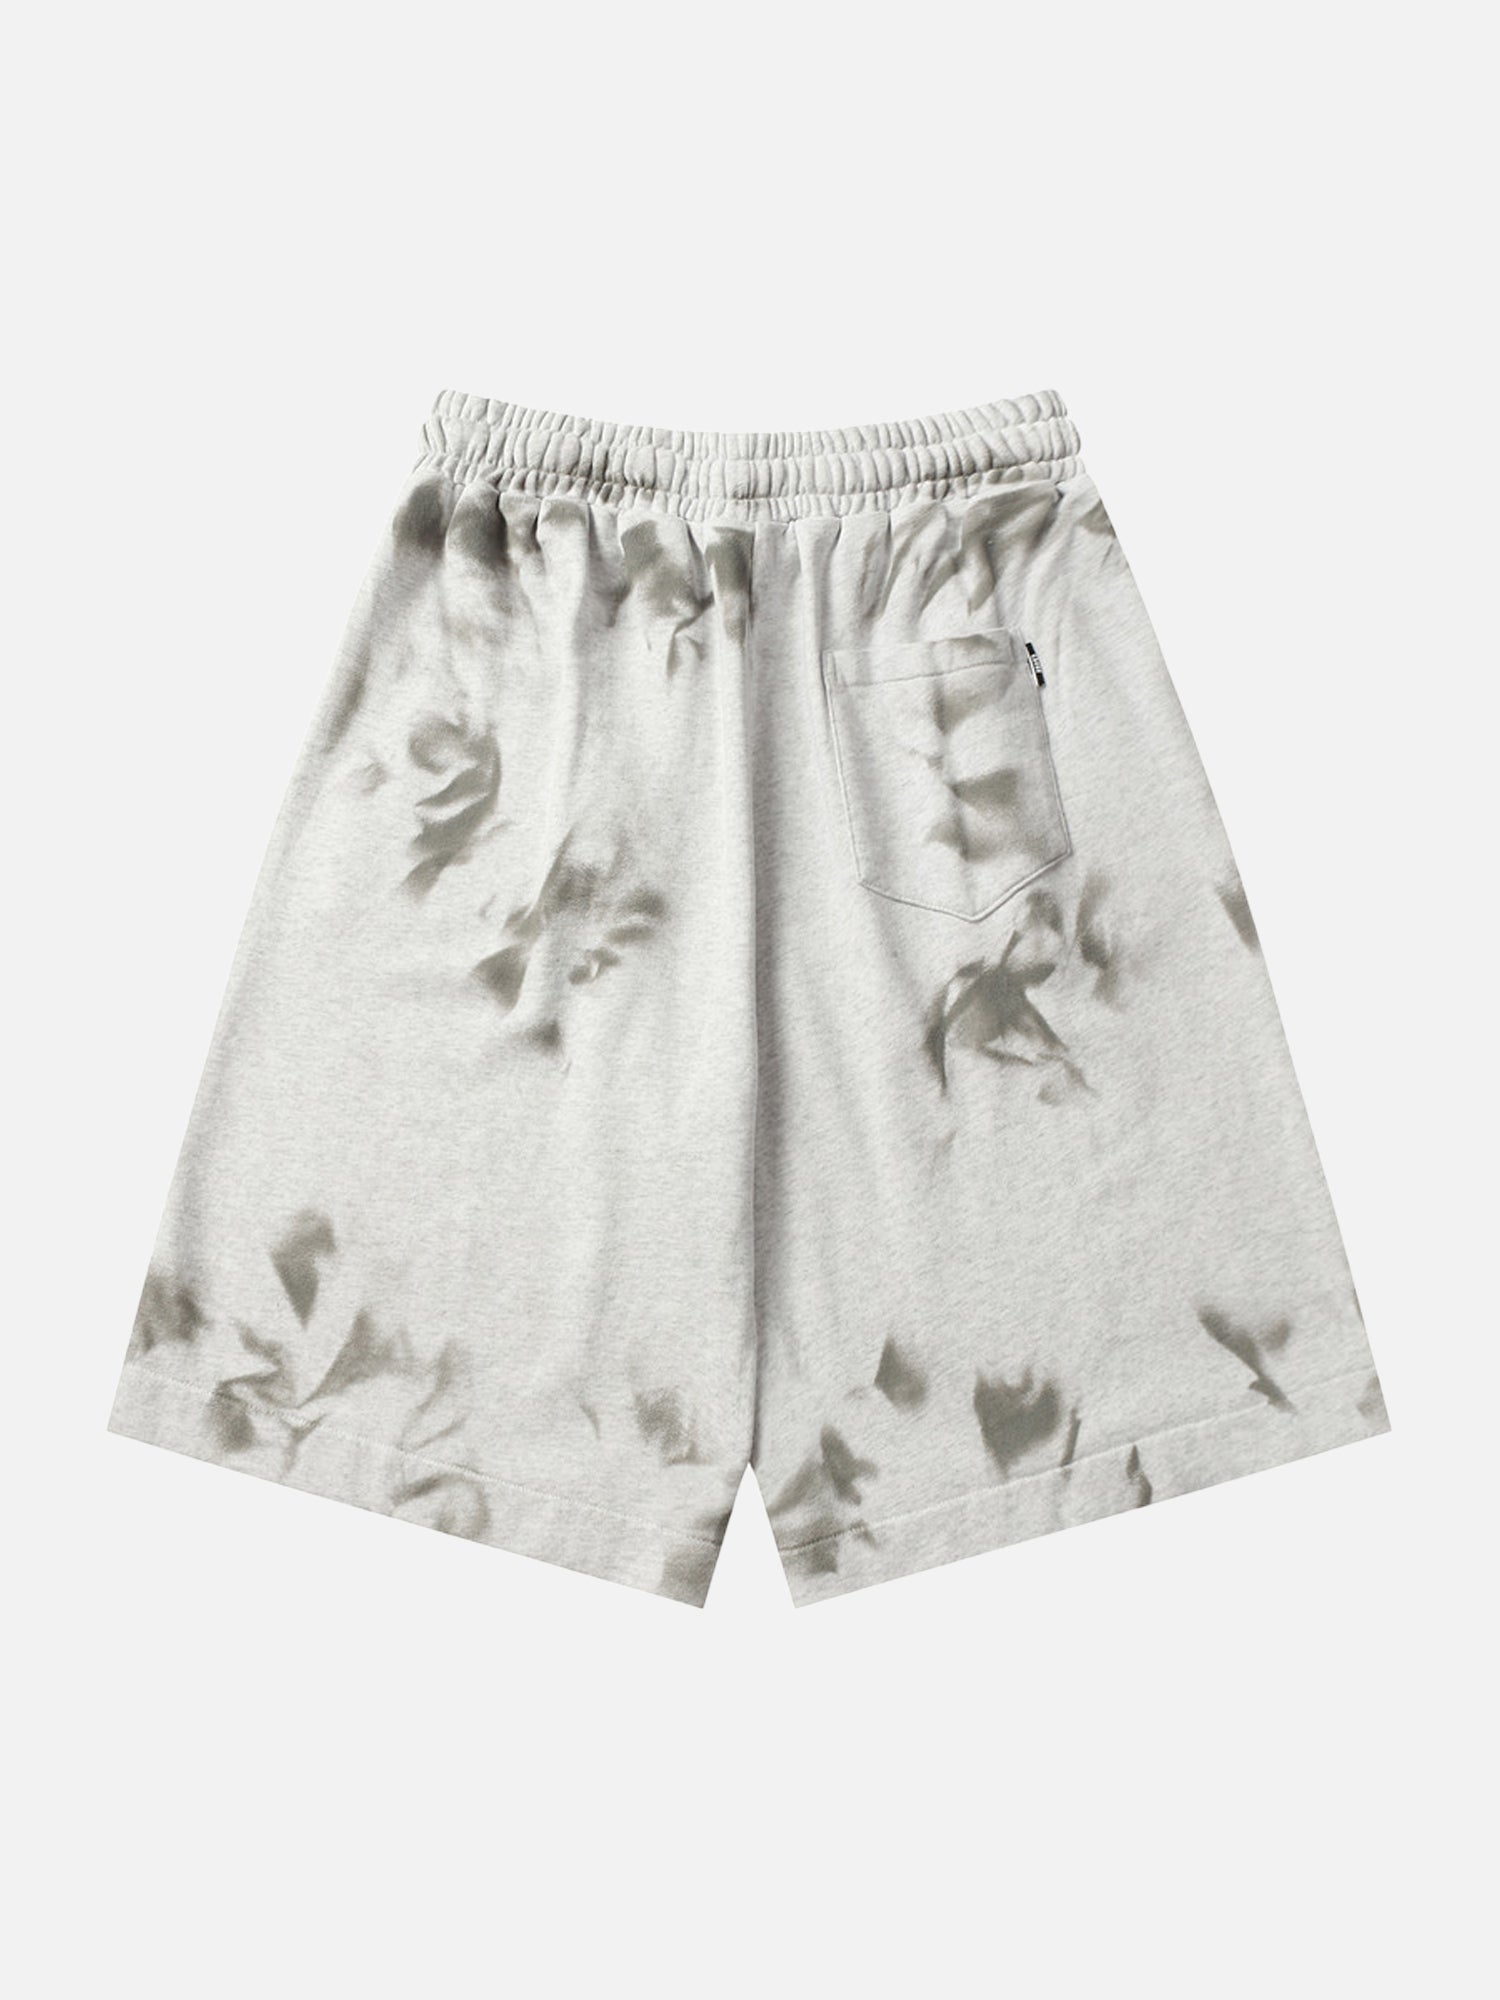 Thesupermade High Street Design Tie-dye Letter Casual Shorts